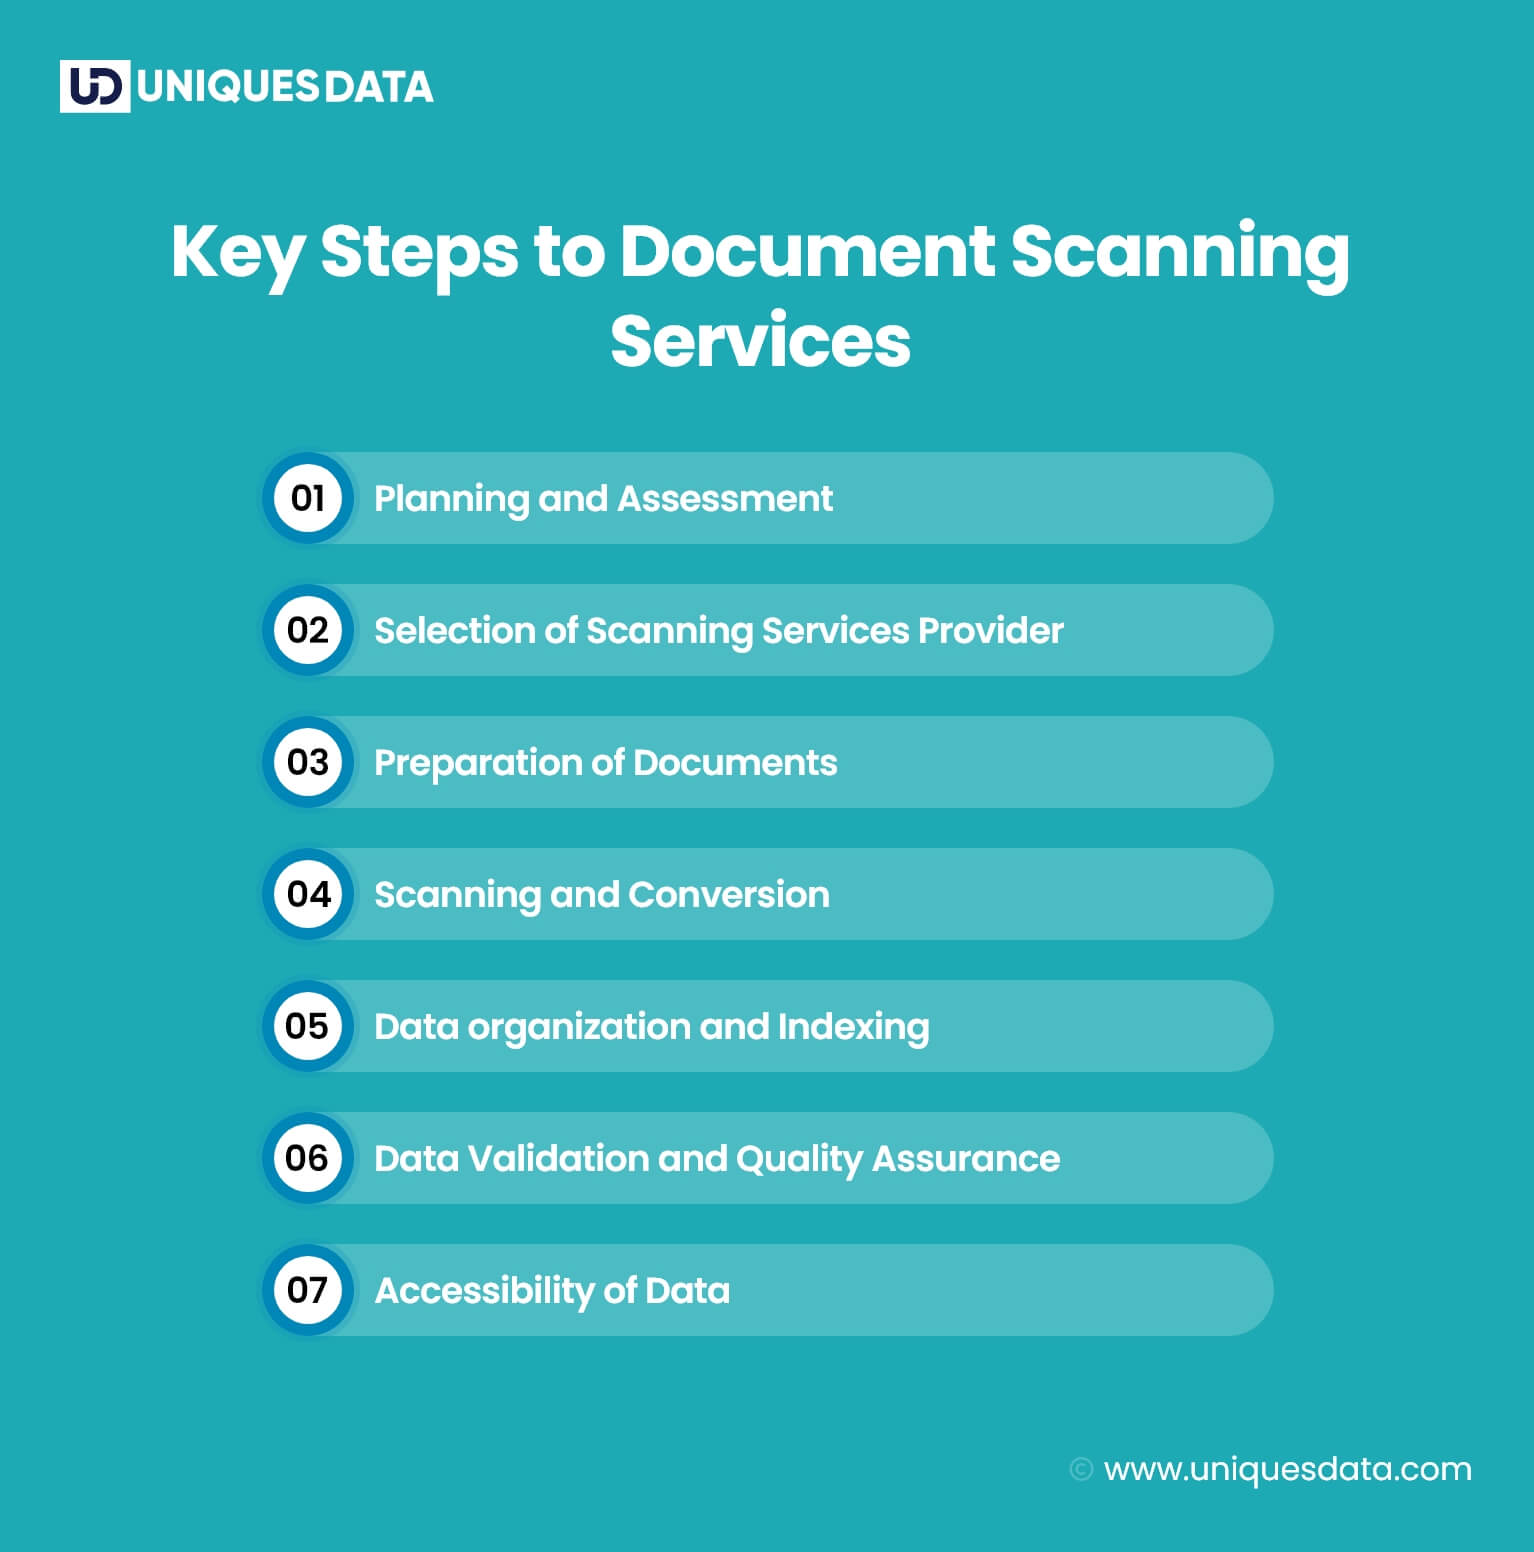 Key Steps to Document Scanning Services